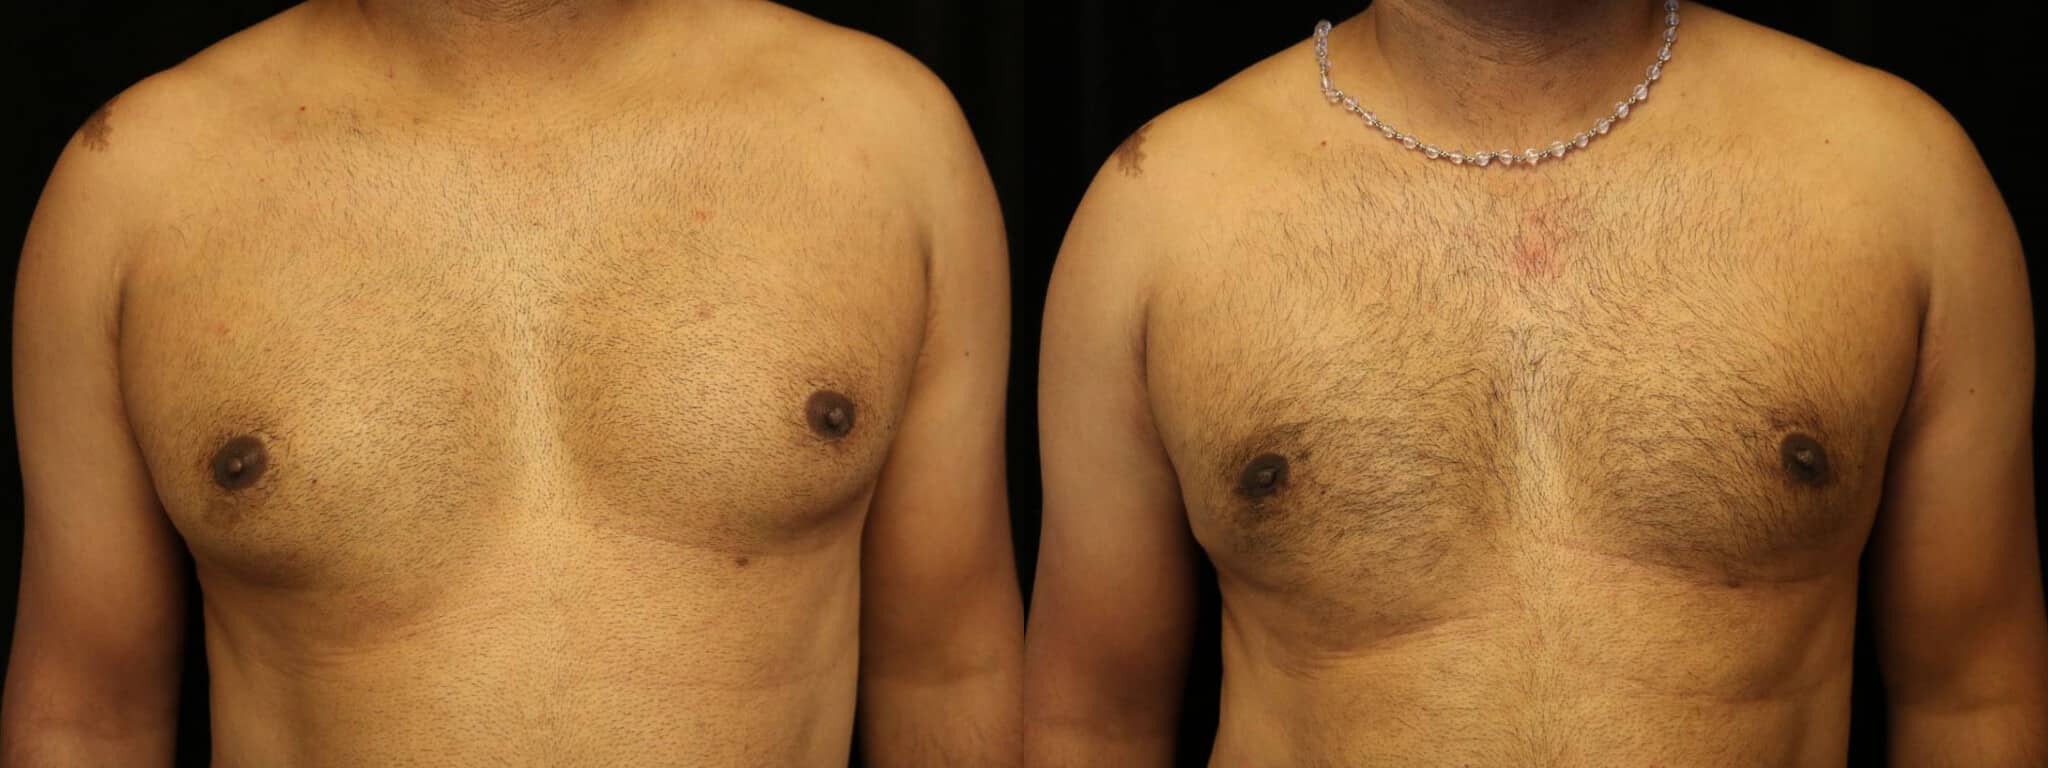 Gynecomastia Patient 19 Before & After